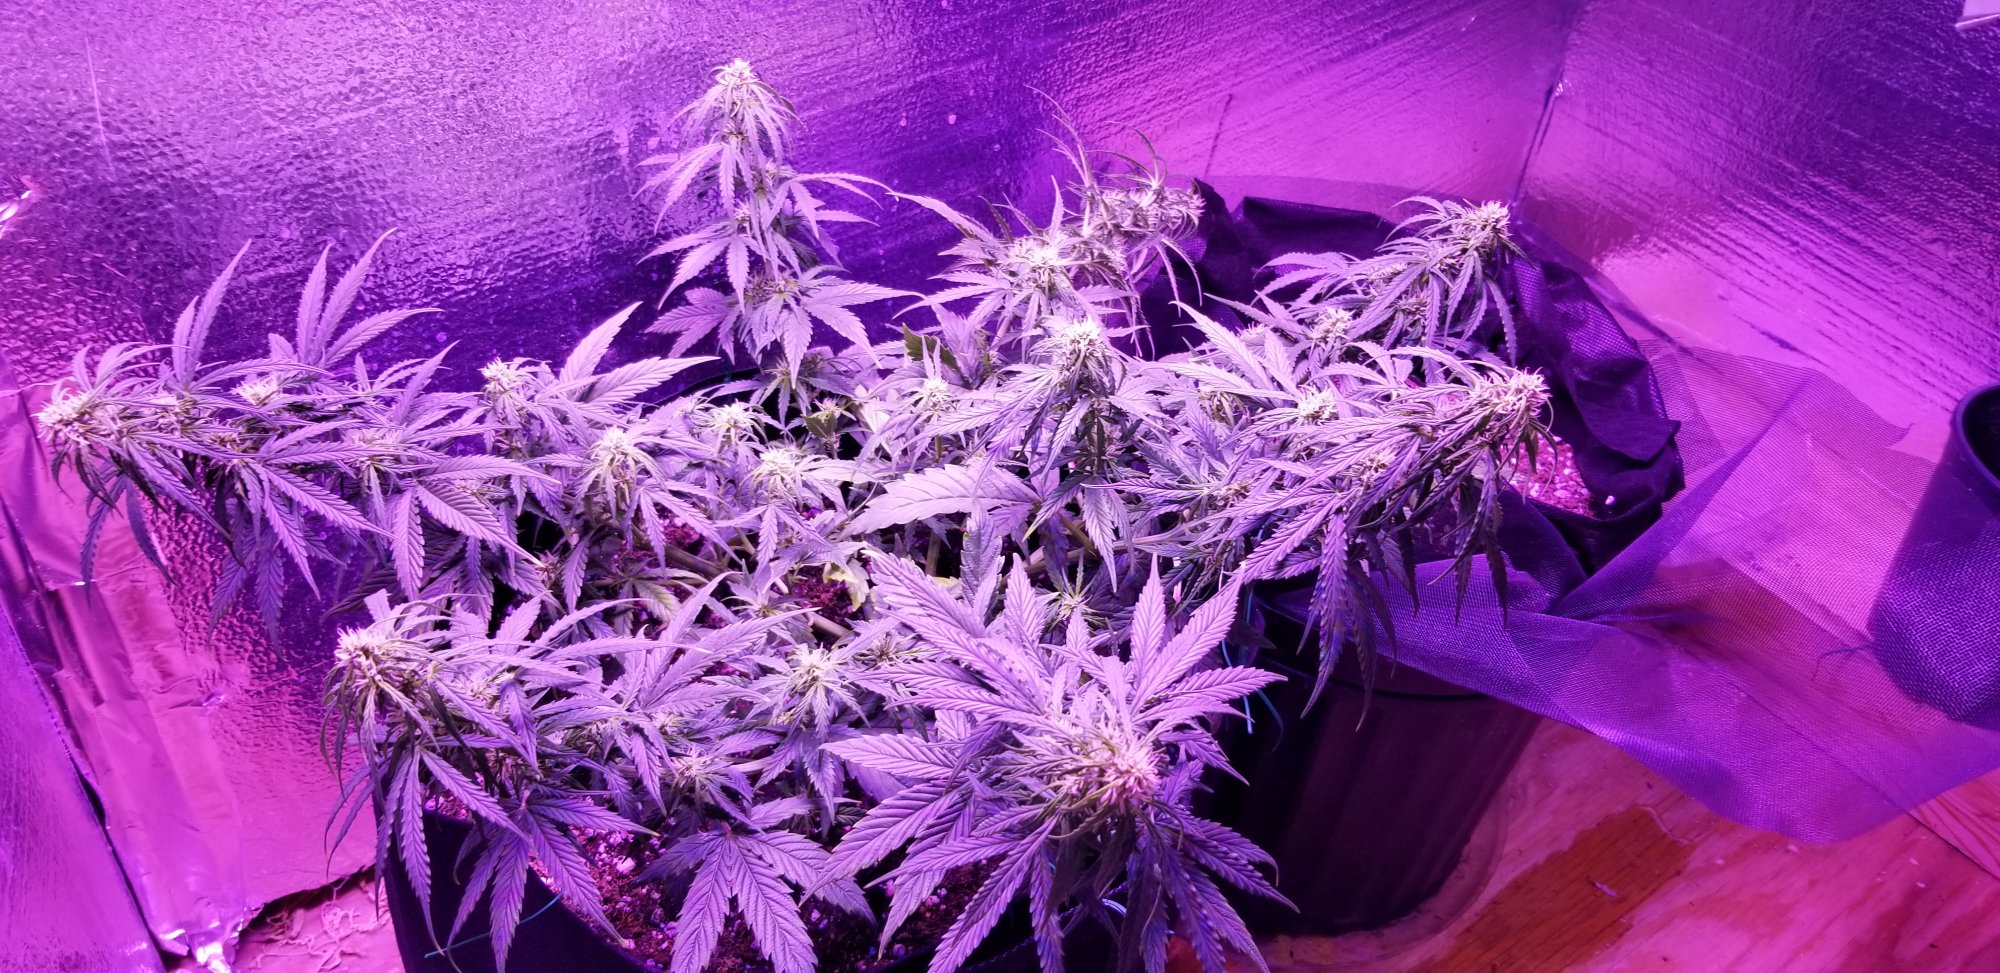 My first auto flower grow pineapple auto from some dude on ebay 13